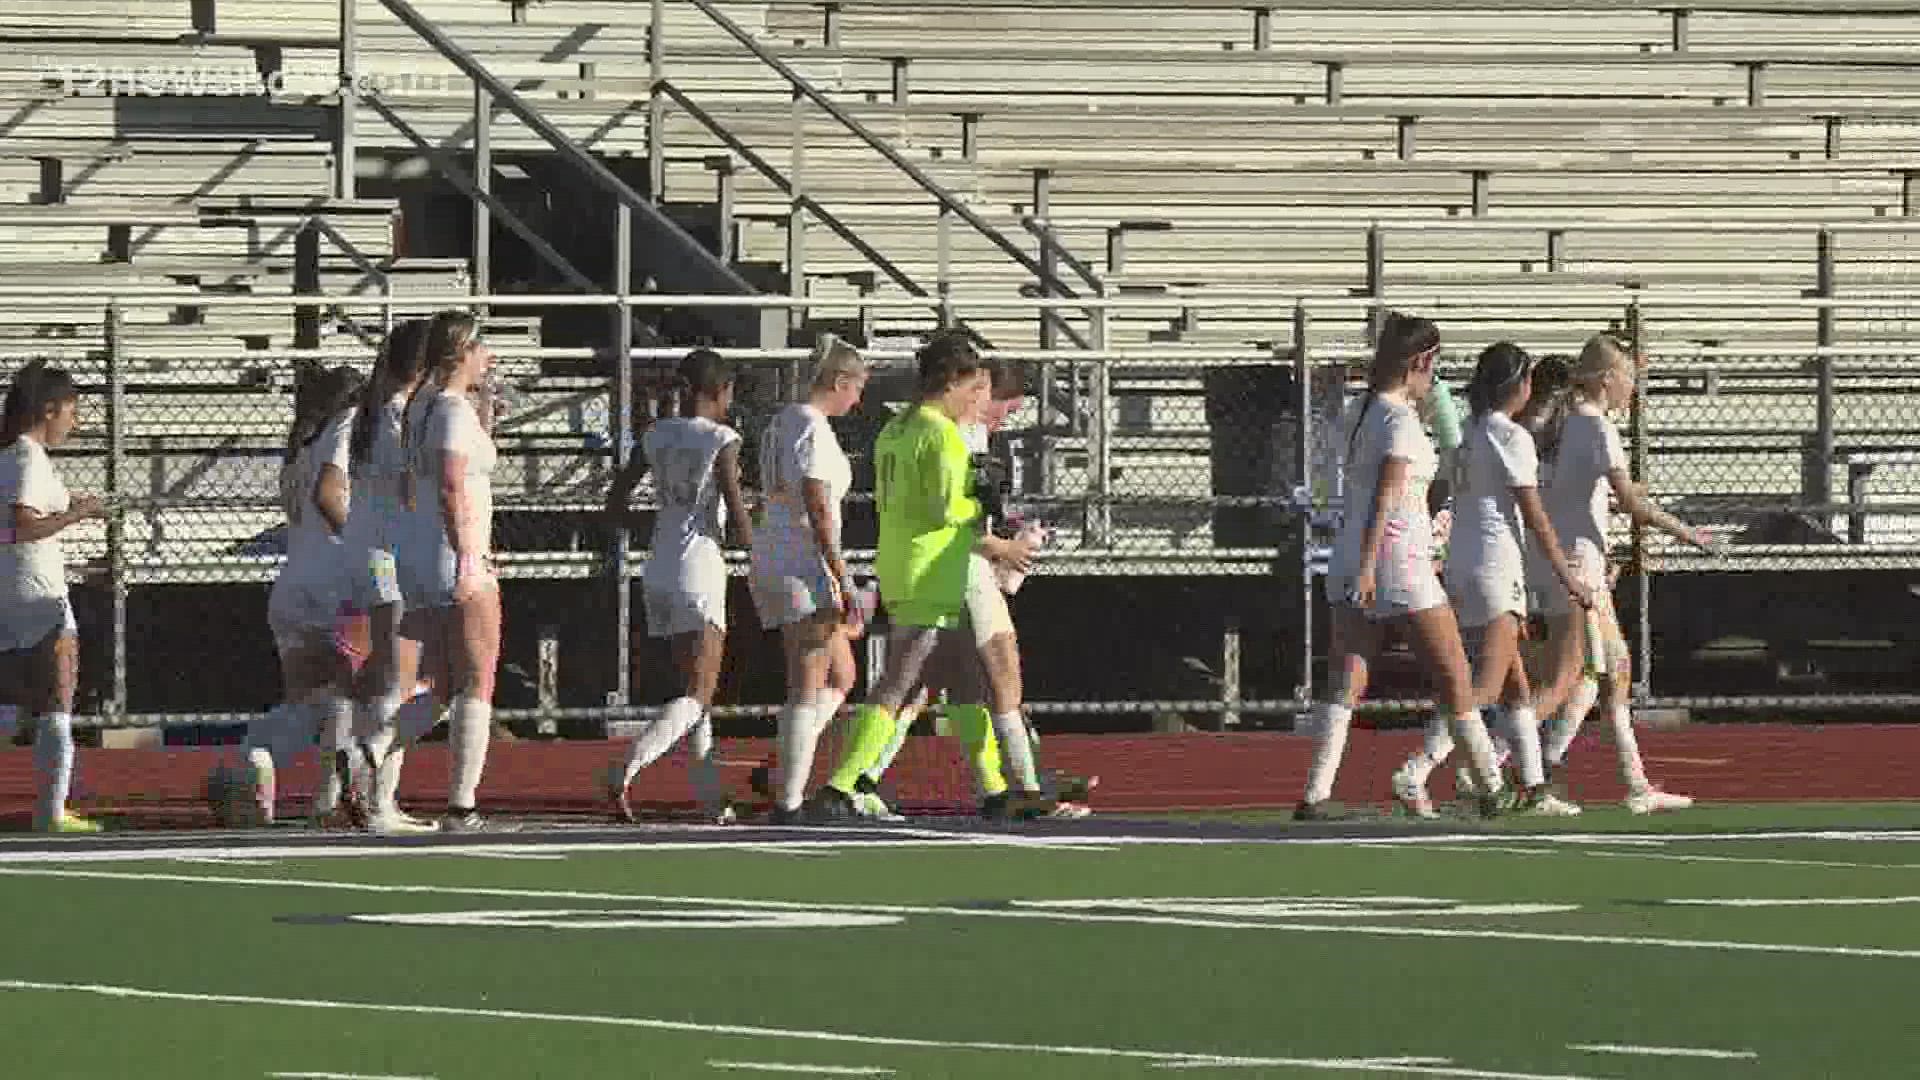 Nederland and Waller fail to score in tournament action